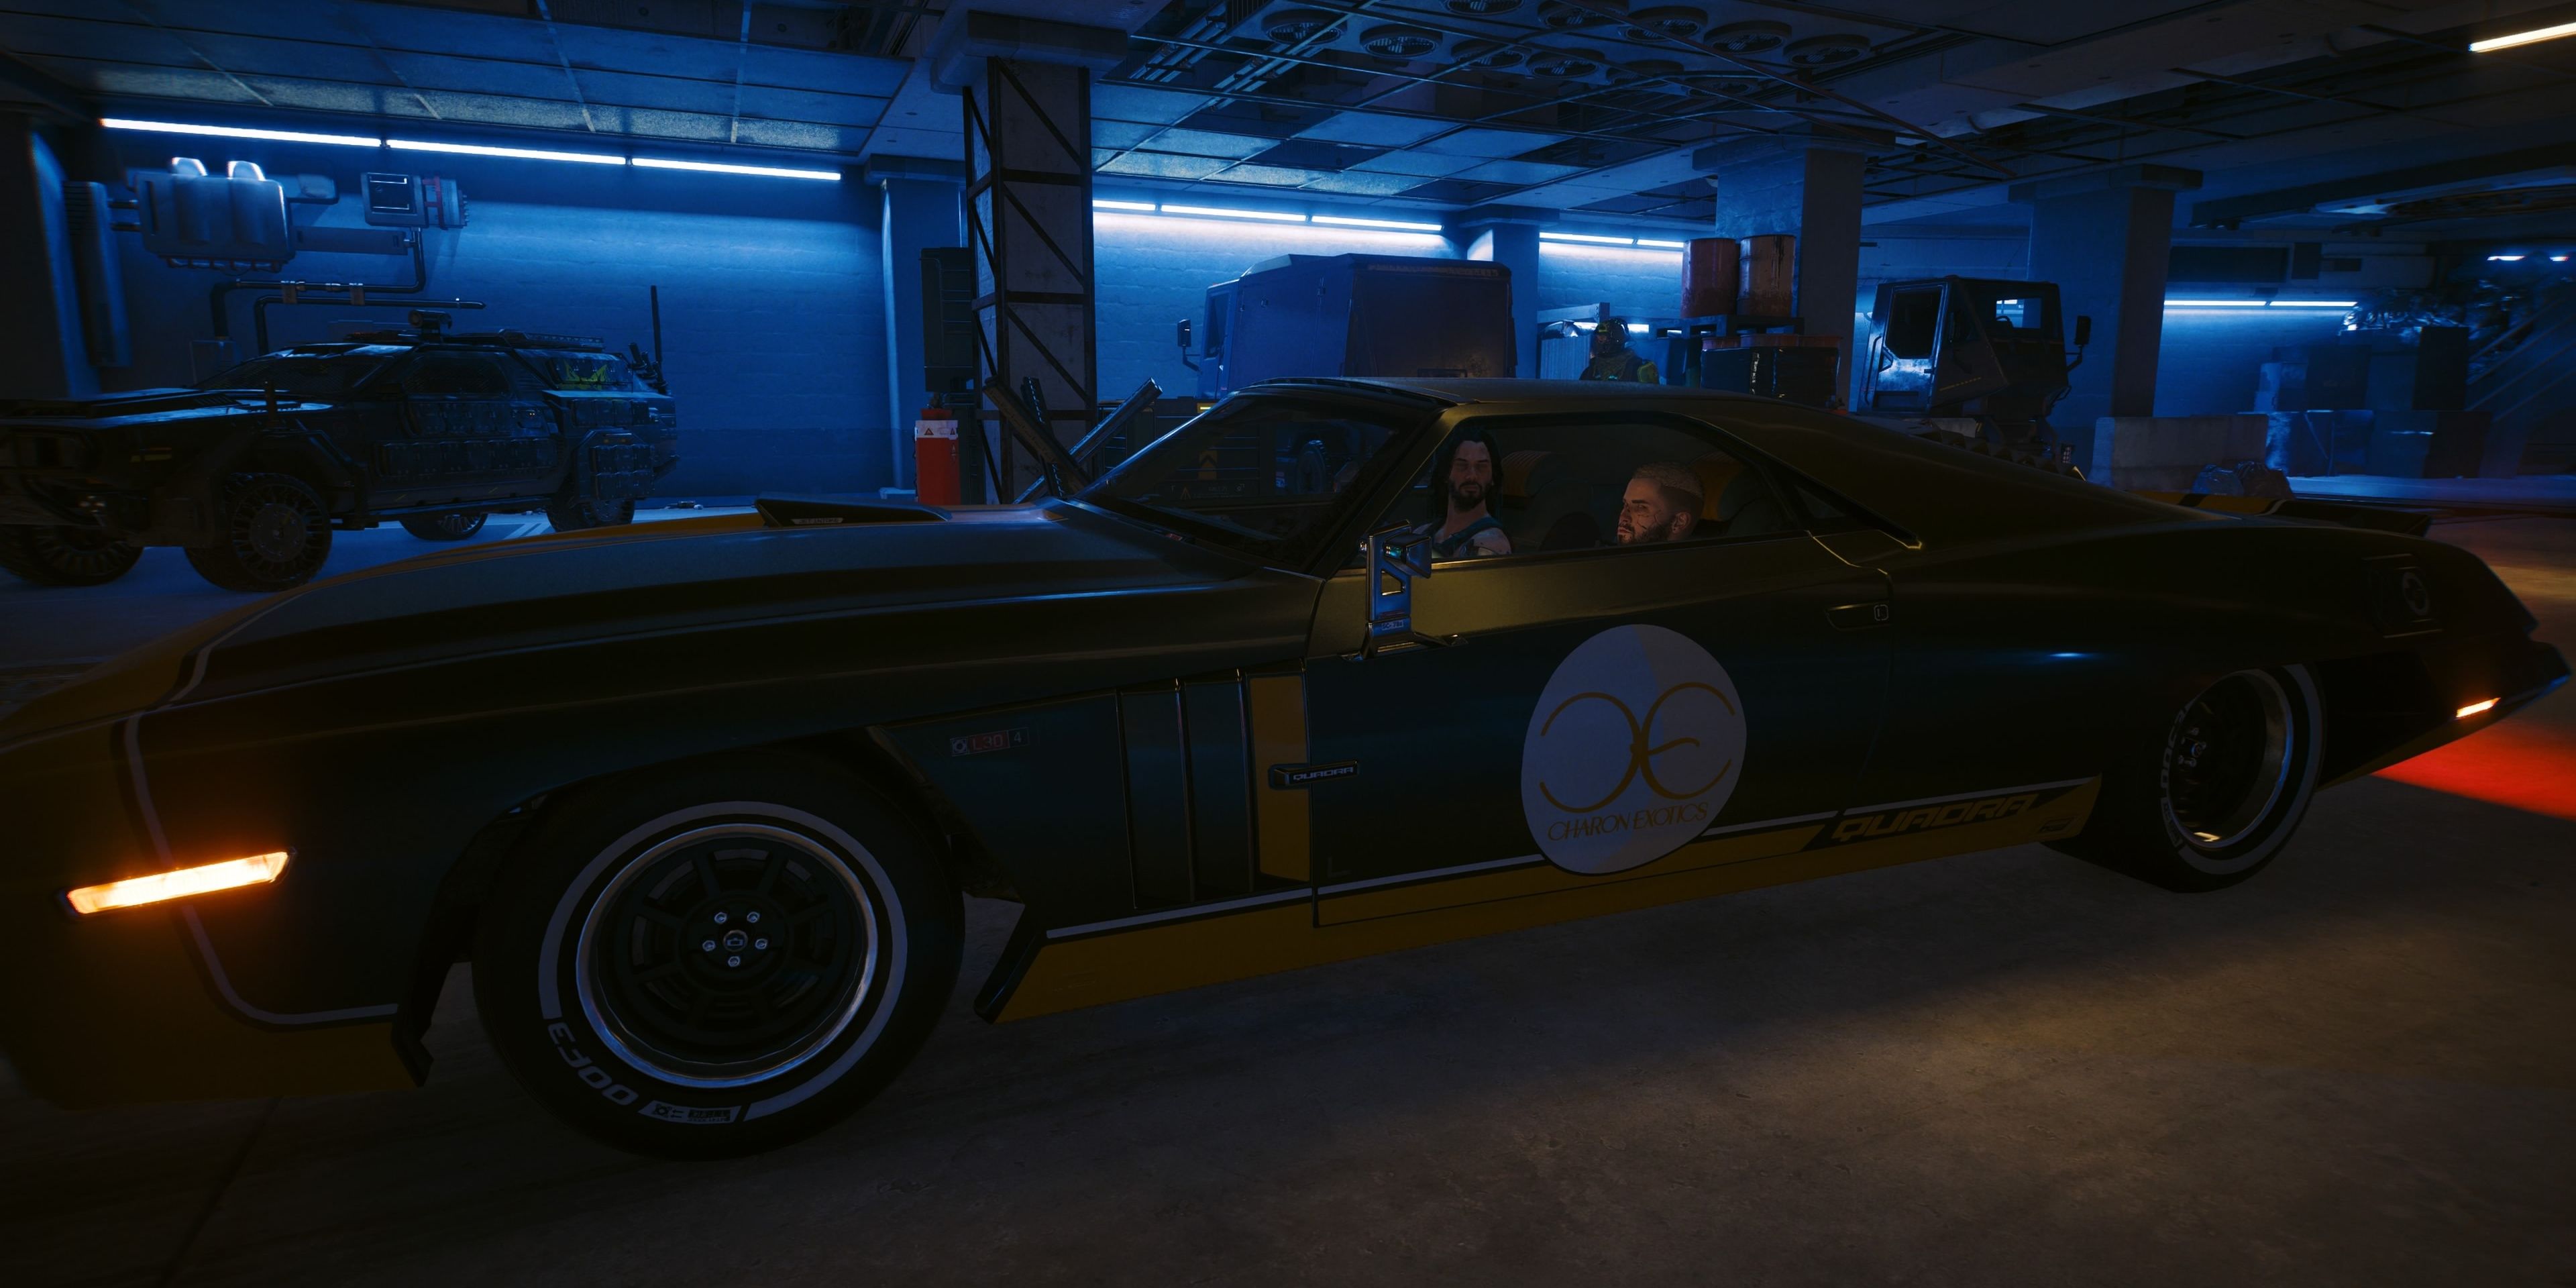 johnny silverhand and v sitting in the "charon" quadra car